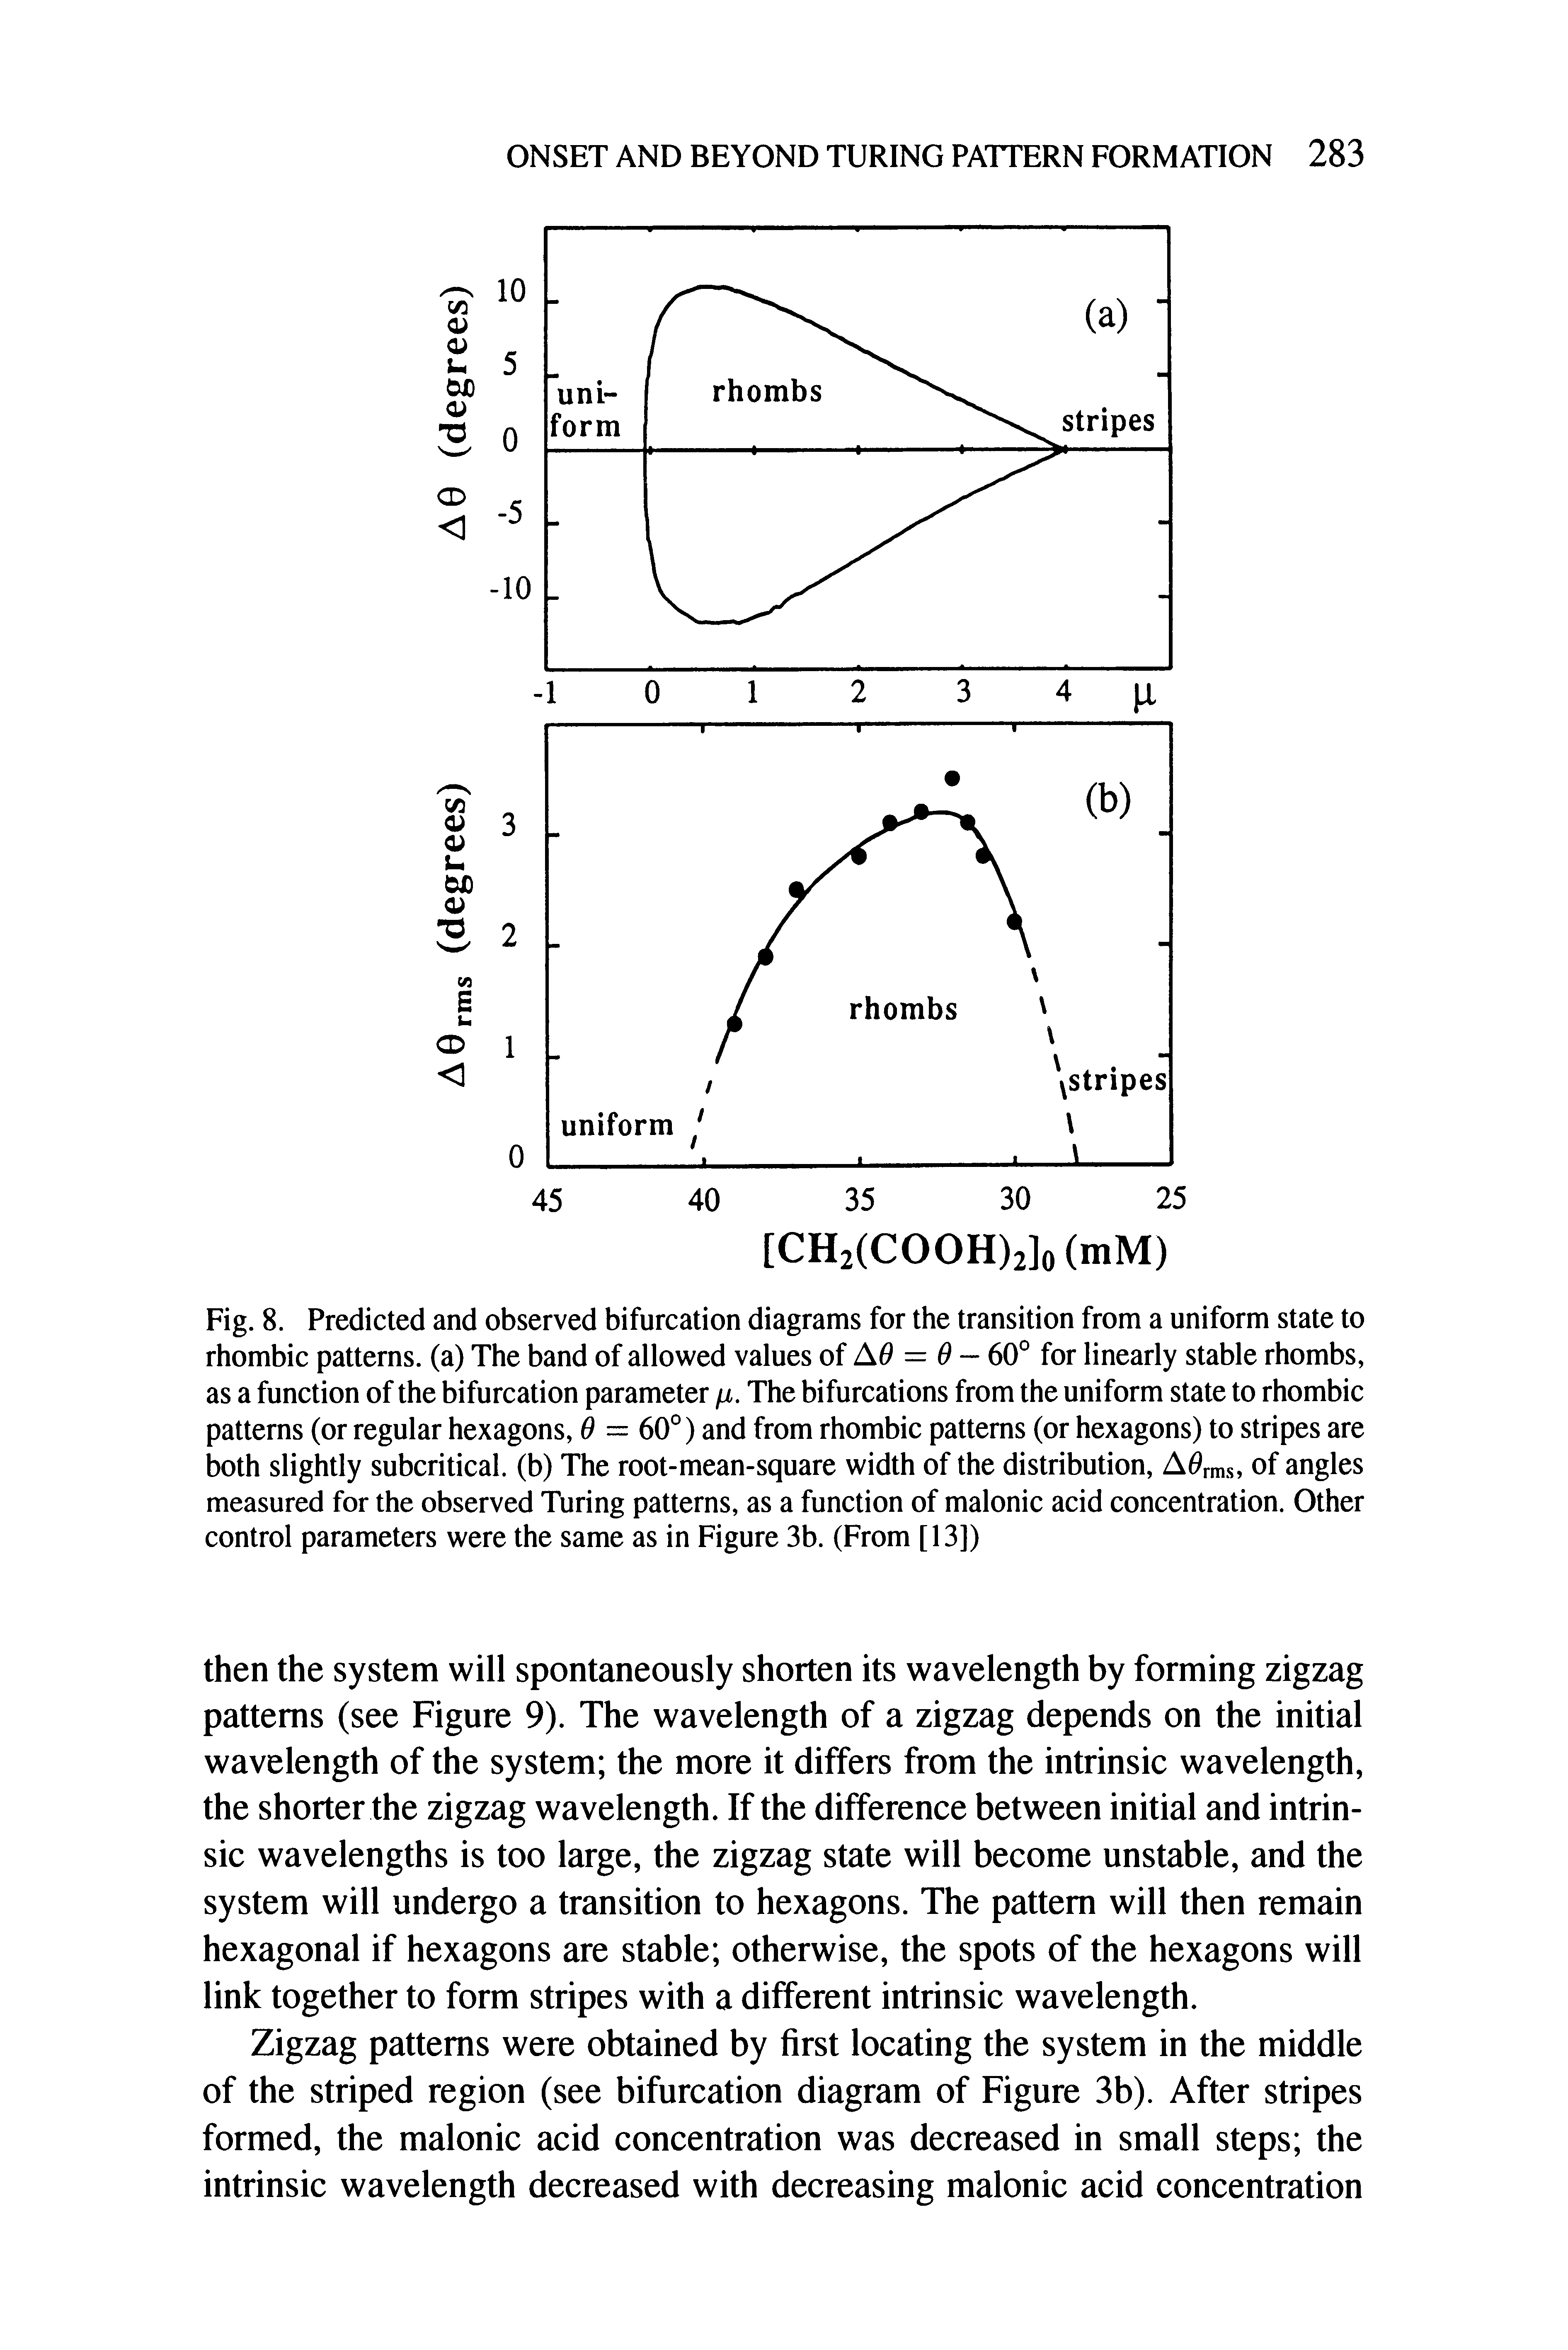 Fig. 8. Predicted and observed bifurcation diagrams for the transition from a uniform state to rhombic patterns, (a) The band of allowed values ofA6 = 0- 60° for linearly stable rhombs, as a function of the bifurcation parameter n. The bifurcations from the uniform state to rhombic patterns (or regular hexagons, 0 — 60°) and from rhombic patterns (or hexagons) to stripes are both slightly subcritical. (b) The root-mean-square width of the distribution, A rms, of angles measured for the observed Turing patterns, as a function of malonic acid concentration. Other control parameters were the same as in Figure 3b. (From [13])...